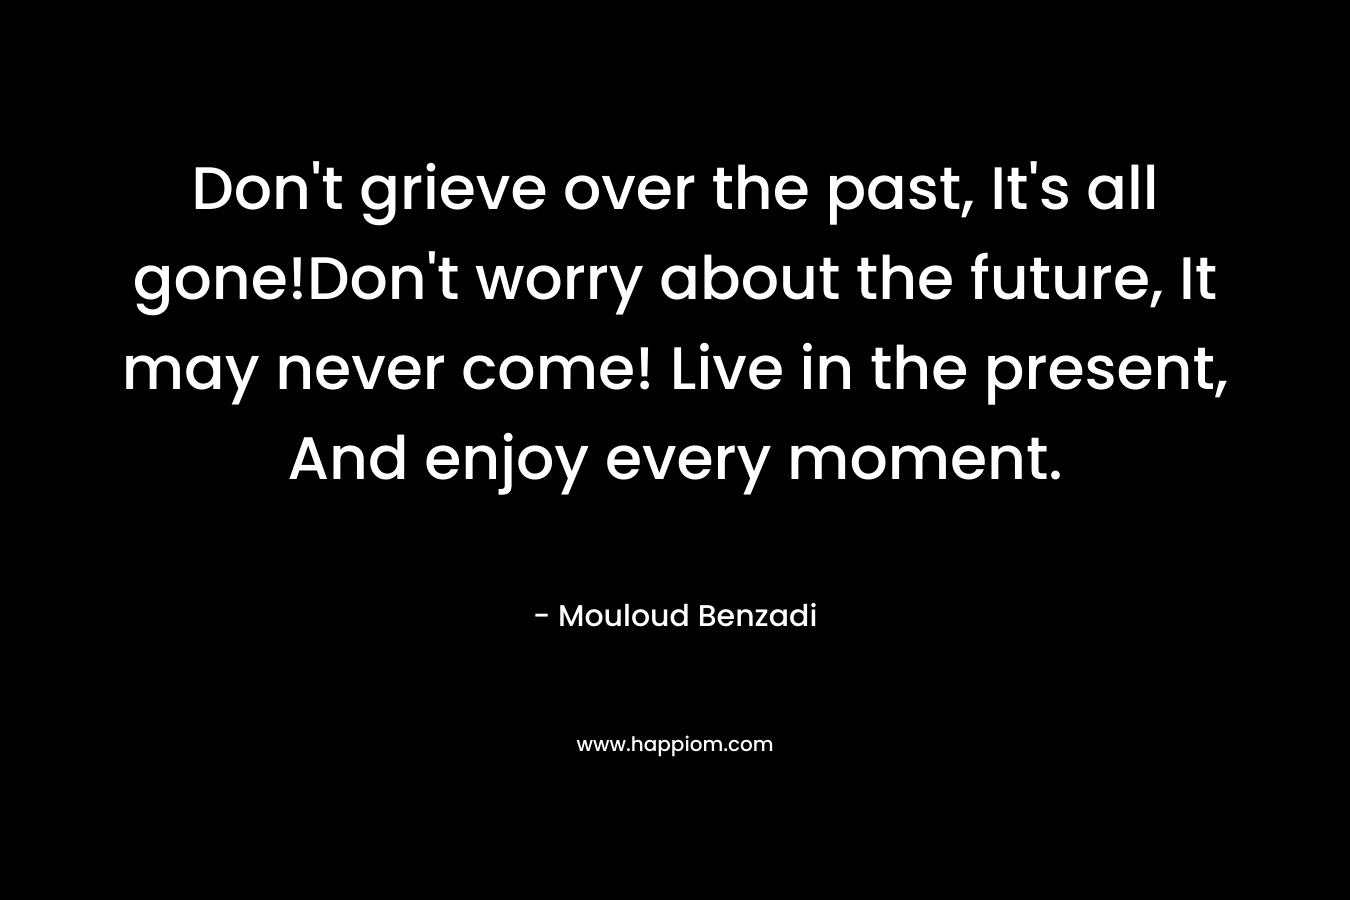 Don't grieve over the past, It's all gone!Don't worry about the future, It may never come! Live in the present, And enjoy every moment.